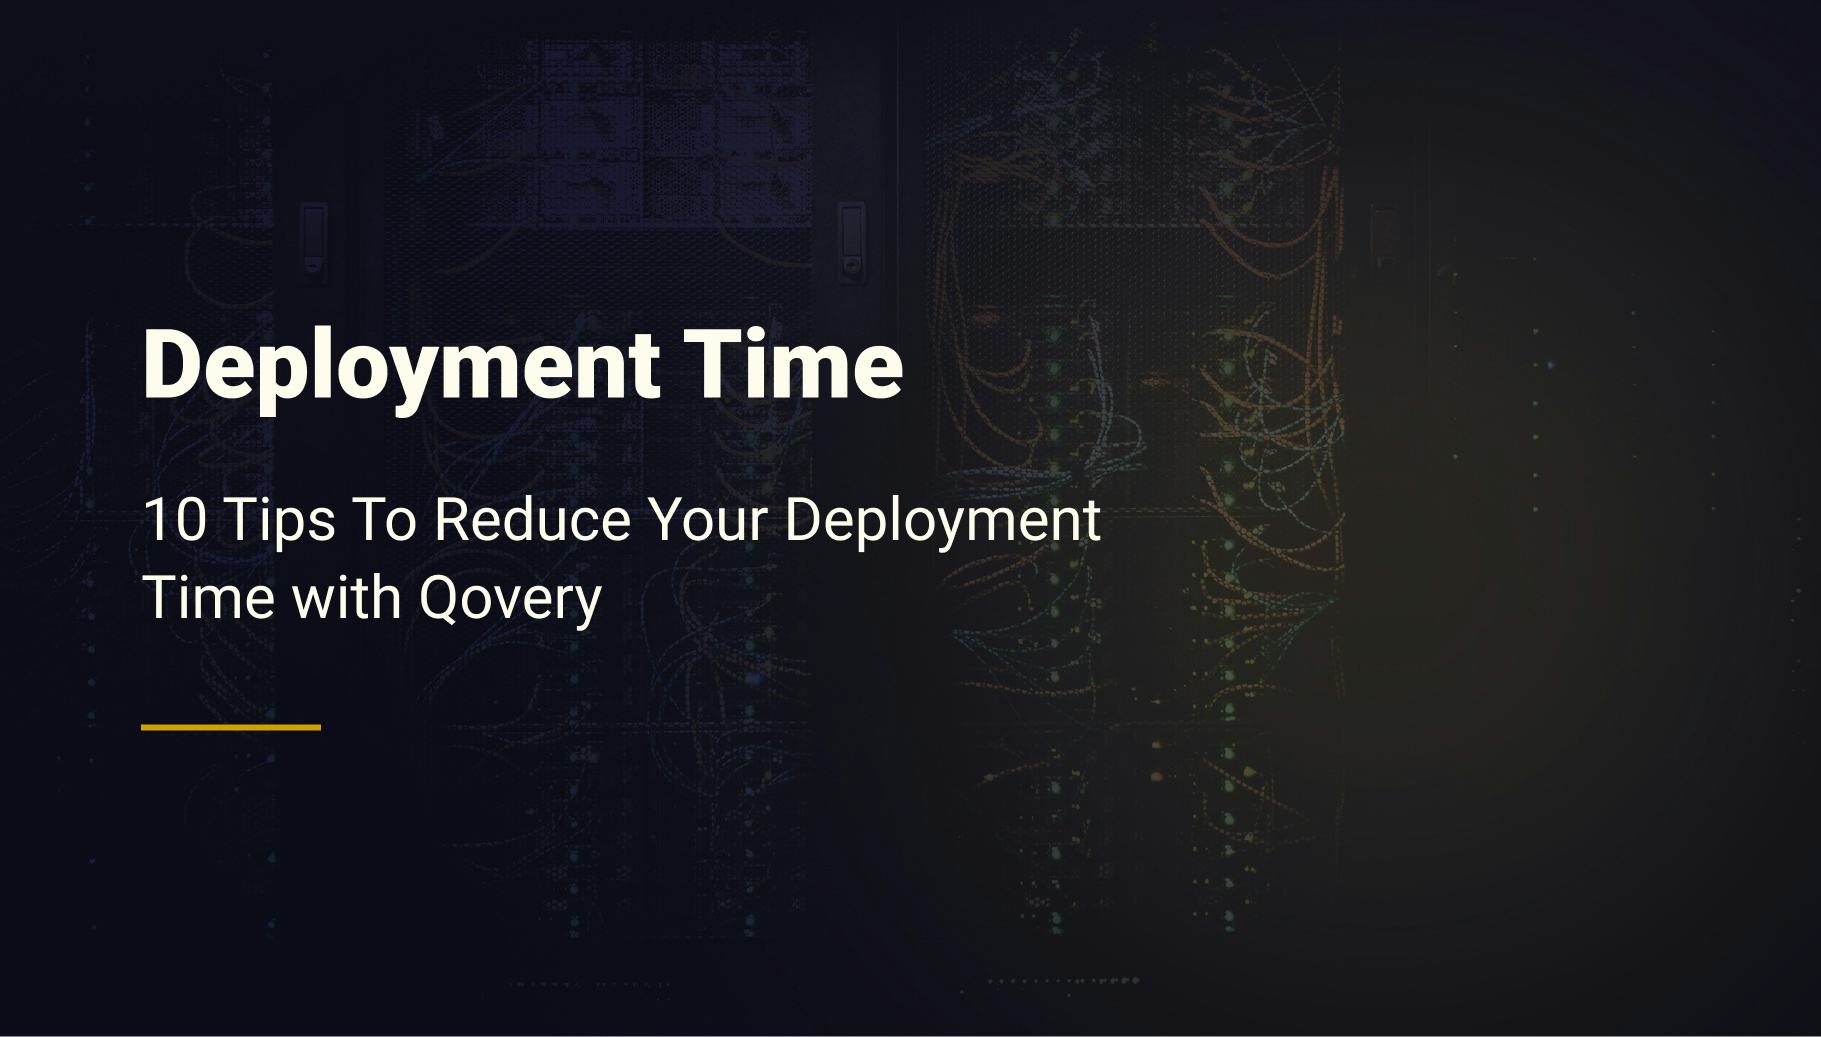 10 Tips To Reduce Your Deployment Time with Qovery - Qovery